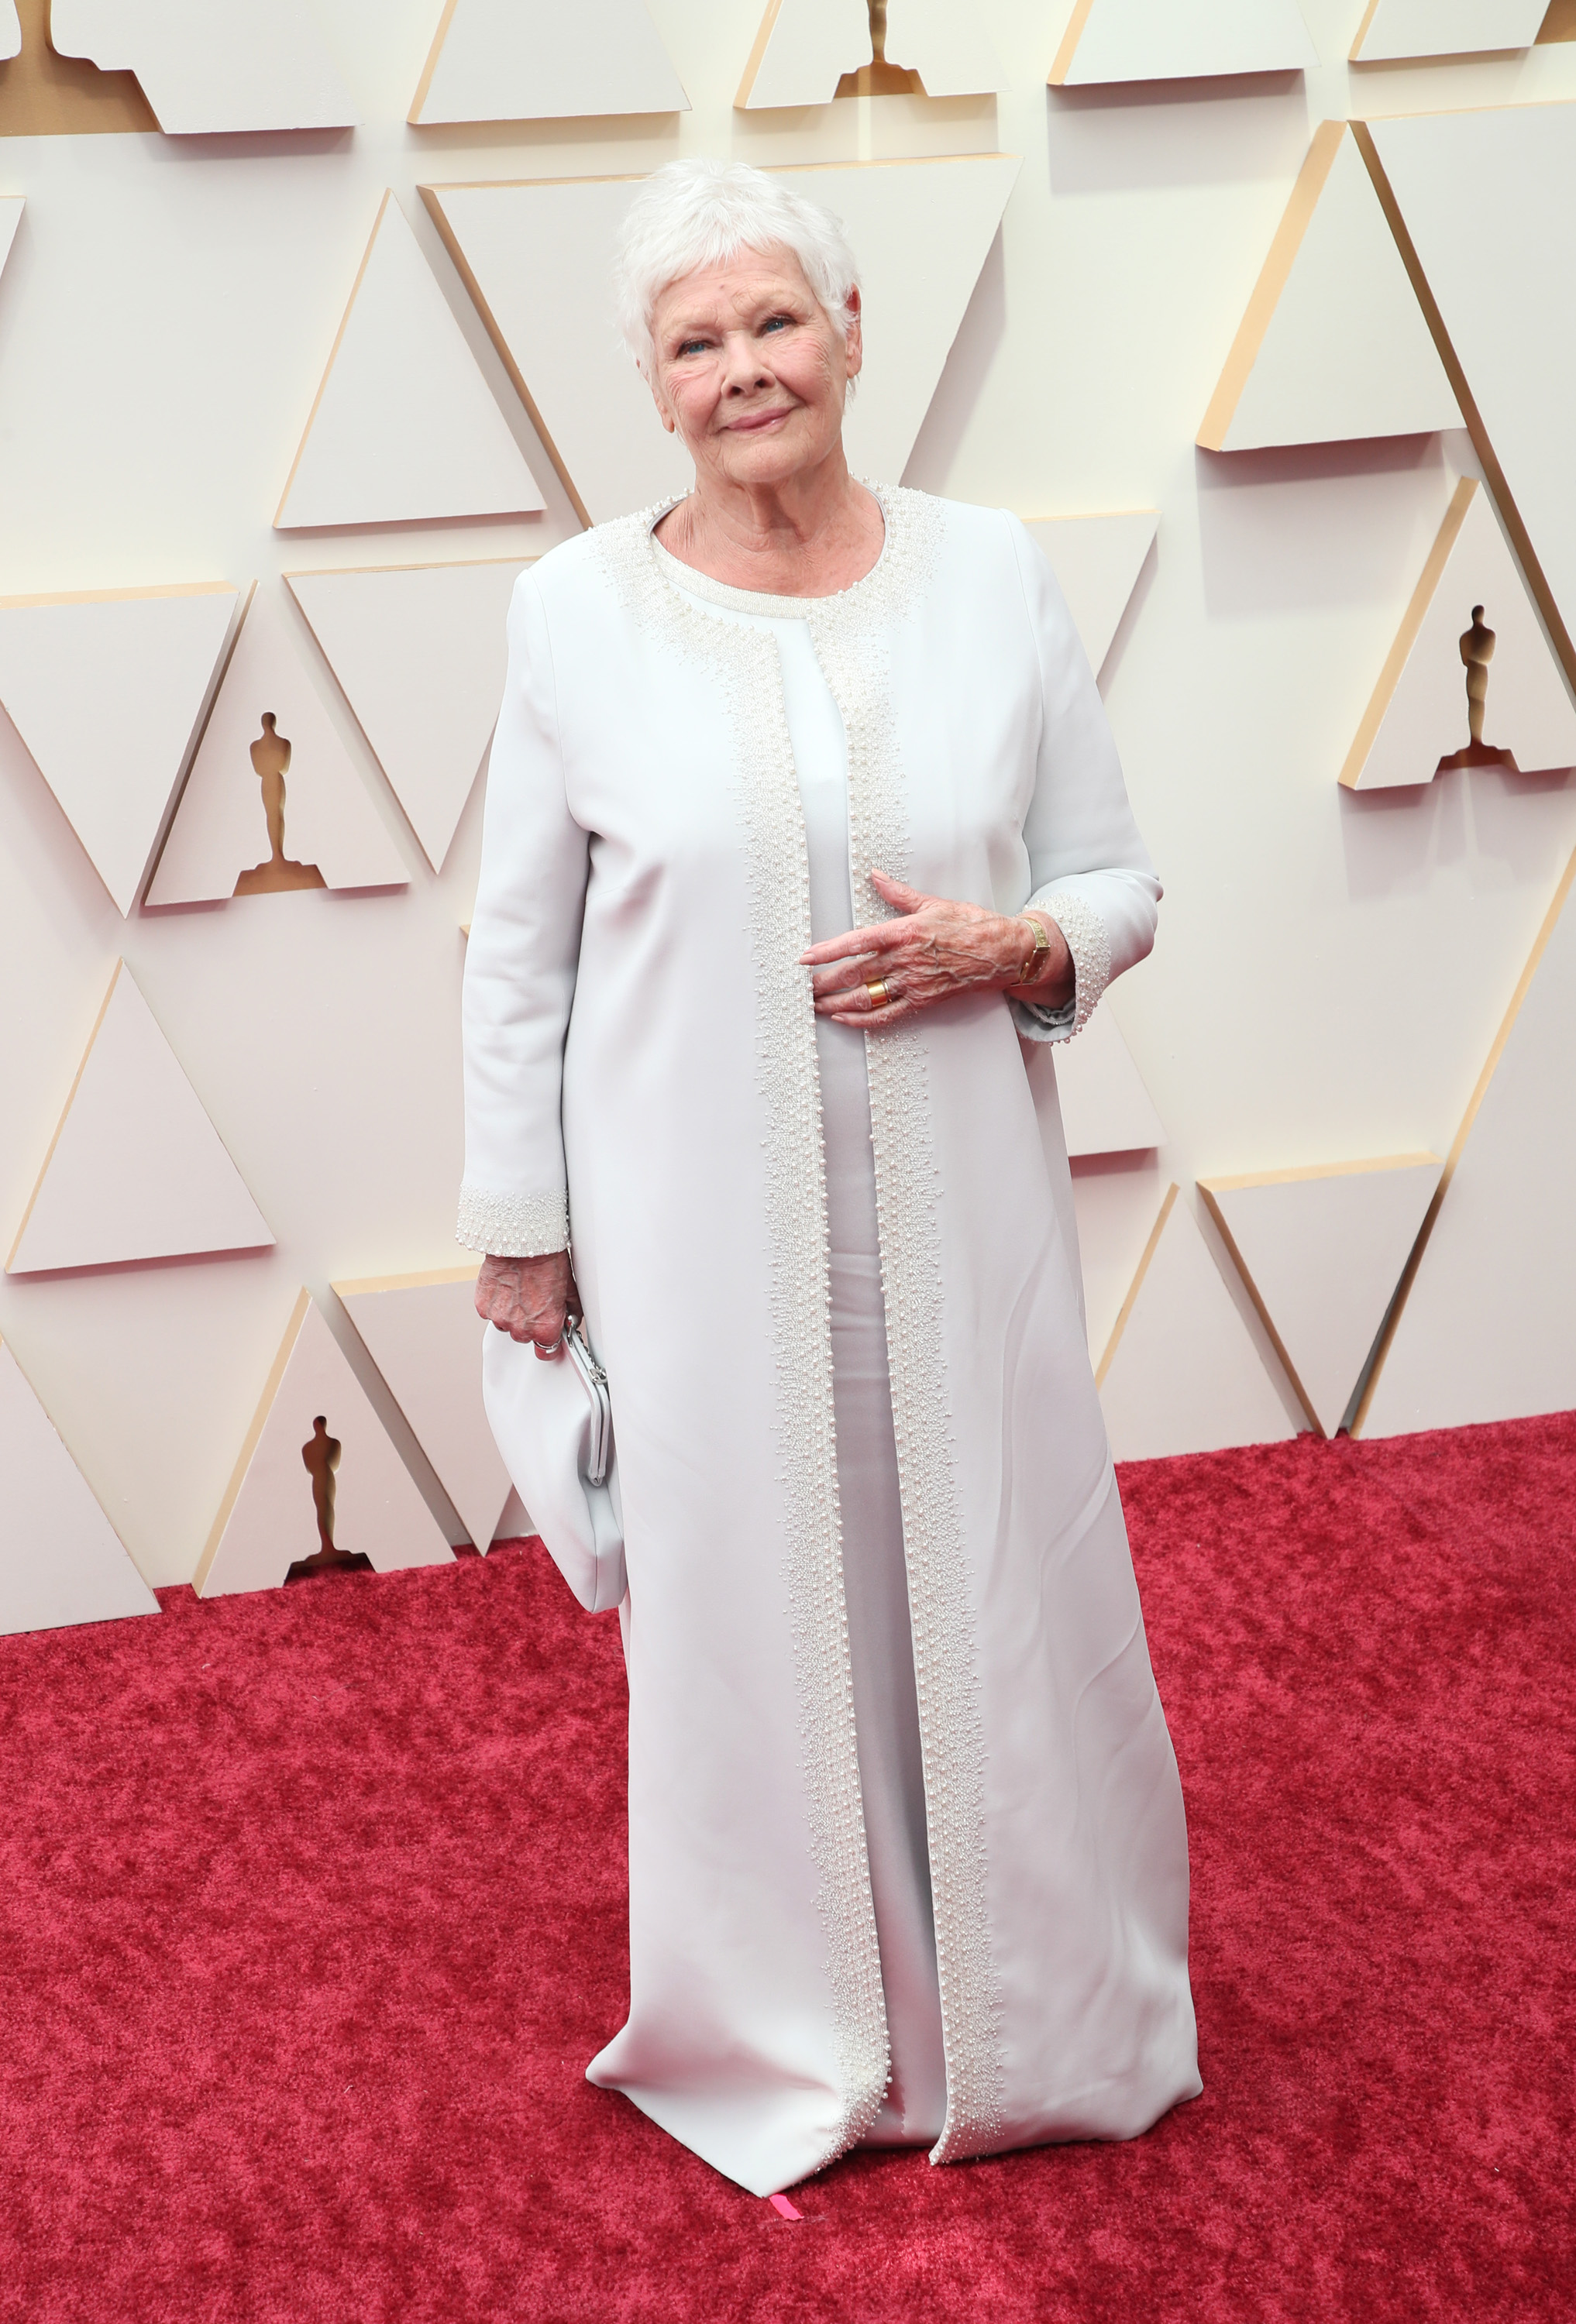 Dame Judi Dench at the 94th Annual Academy Awards in Hollywood, 2022 | Source: Getty Images